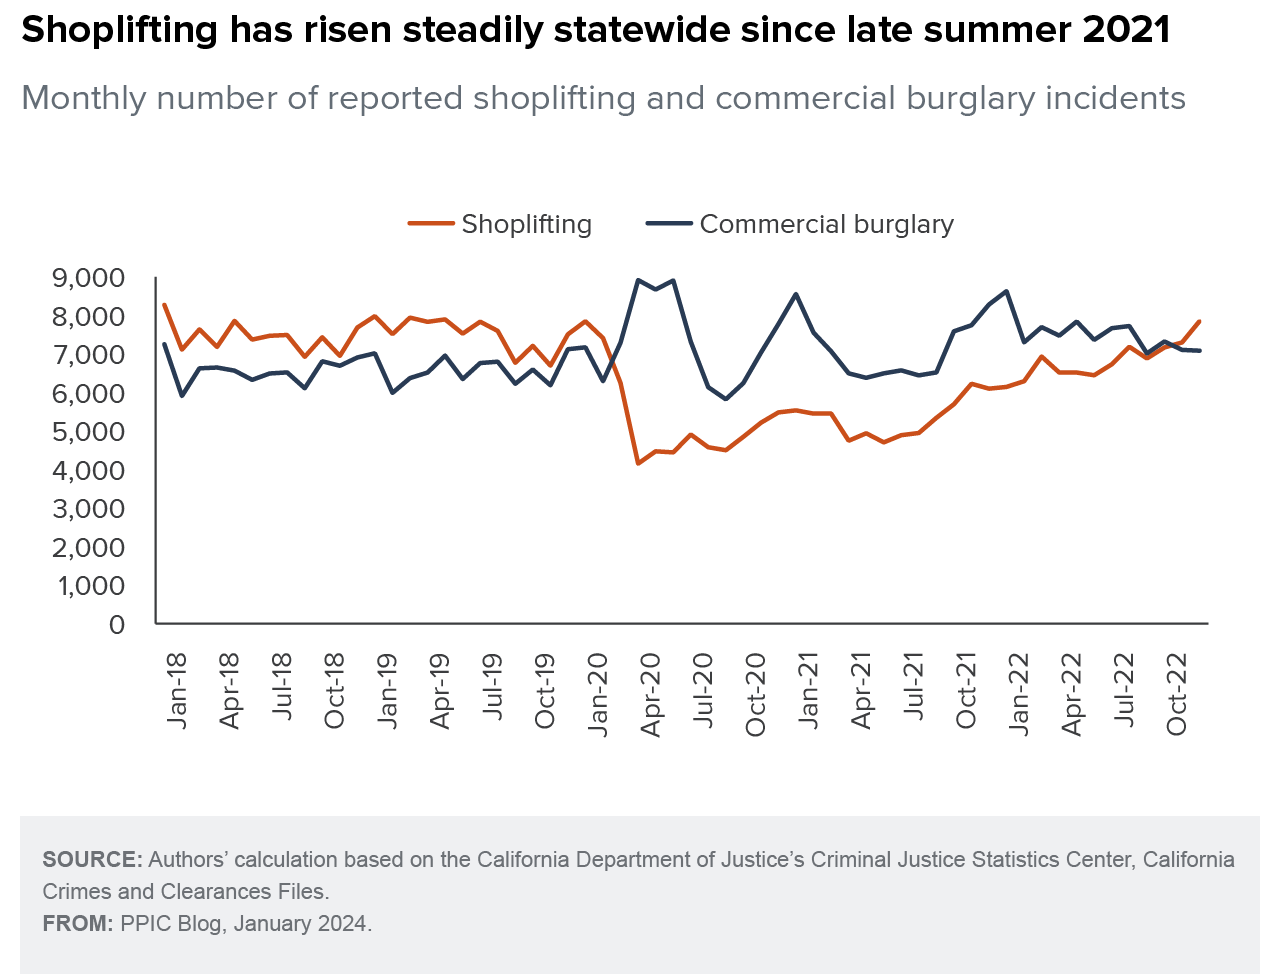 figure - Shoplifting has risen steadily statewide since late summer 2021